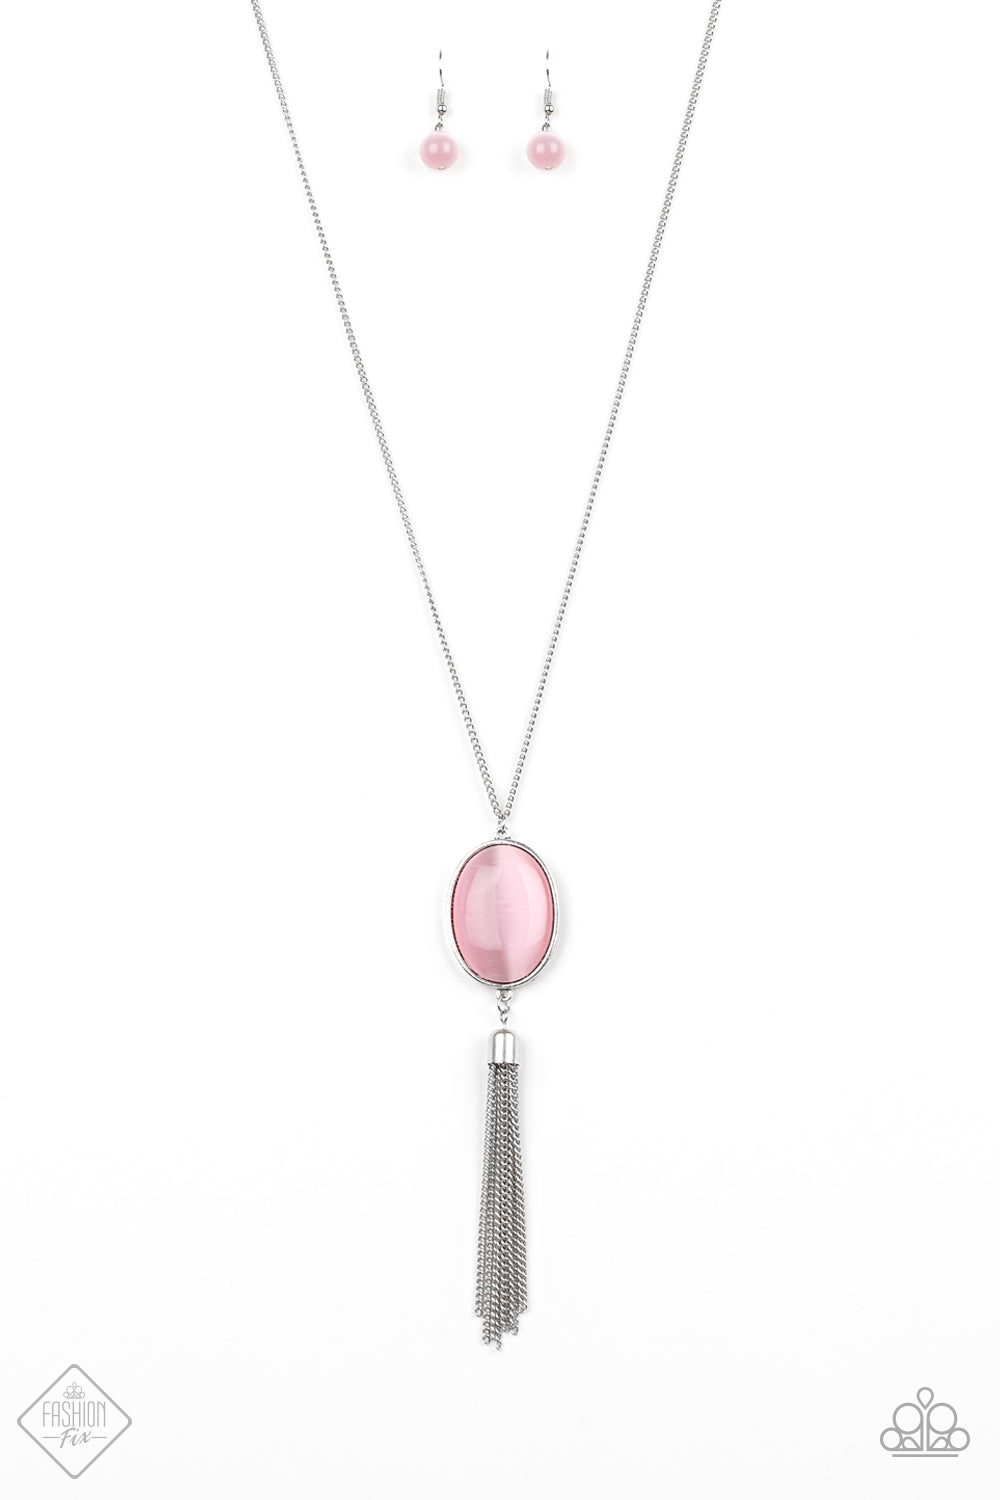 Tasseled Tranquility - Pink Necklace